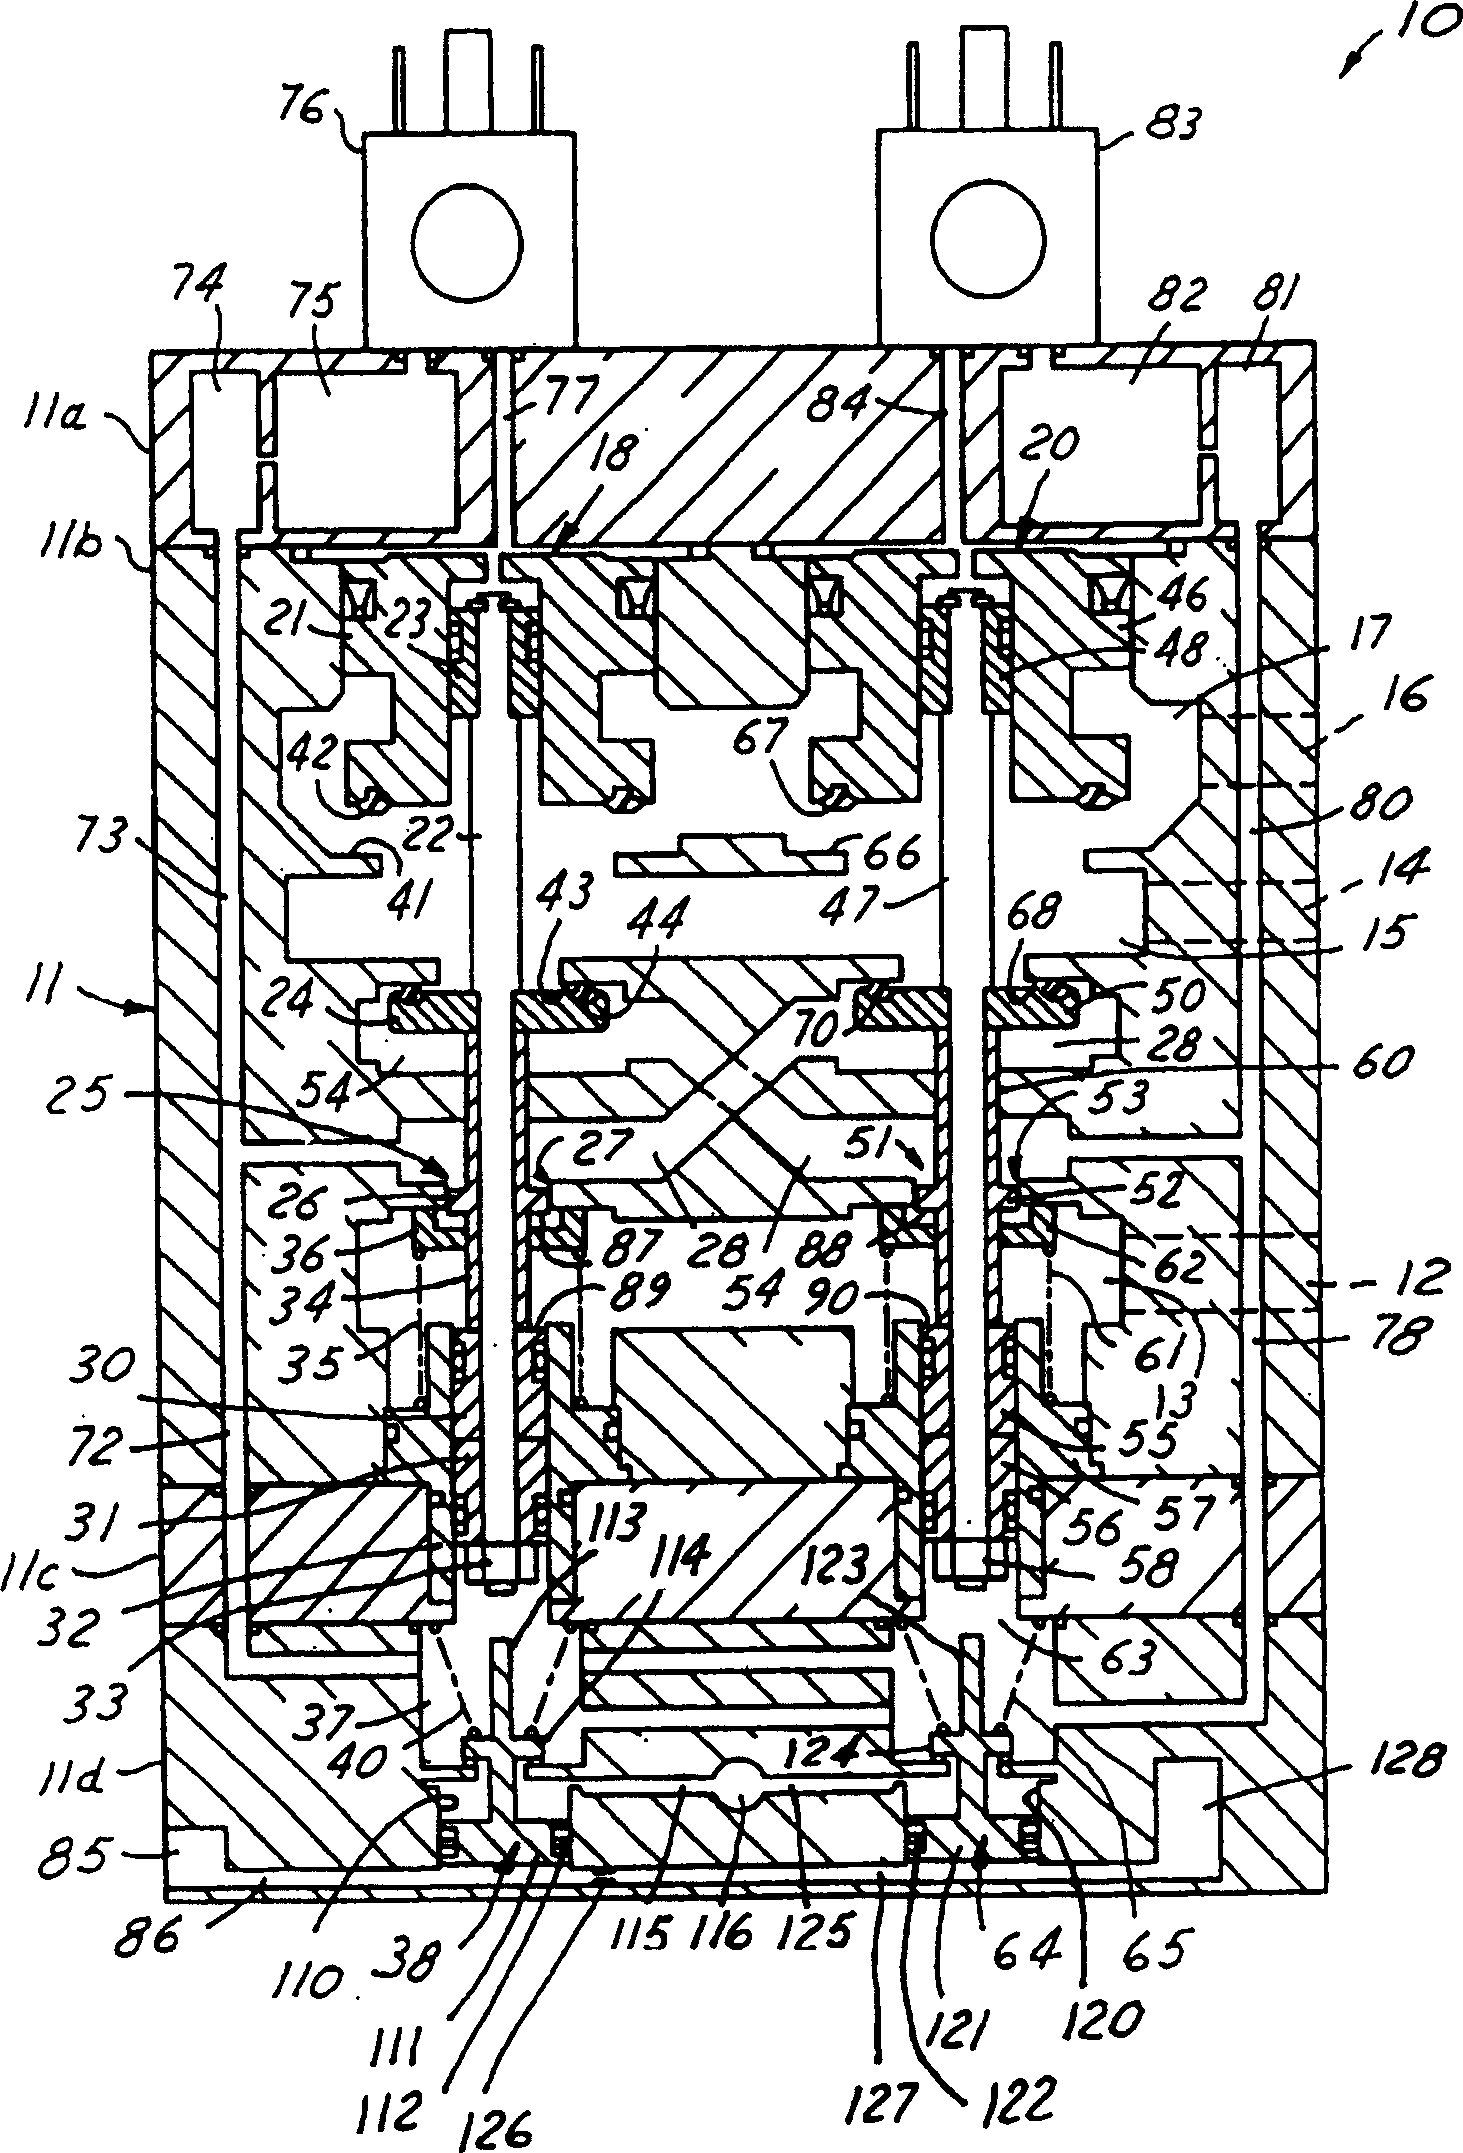 Dynamically-monitored double valve with anti-tiedown feature